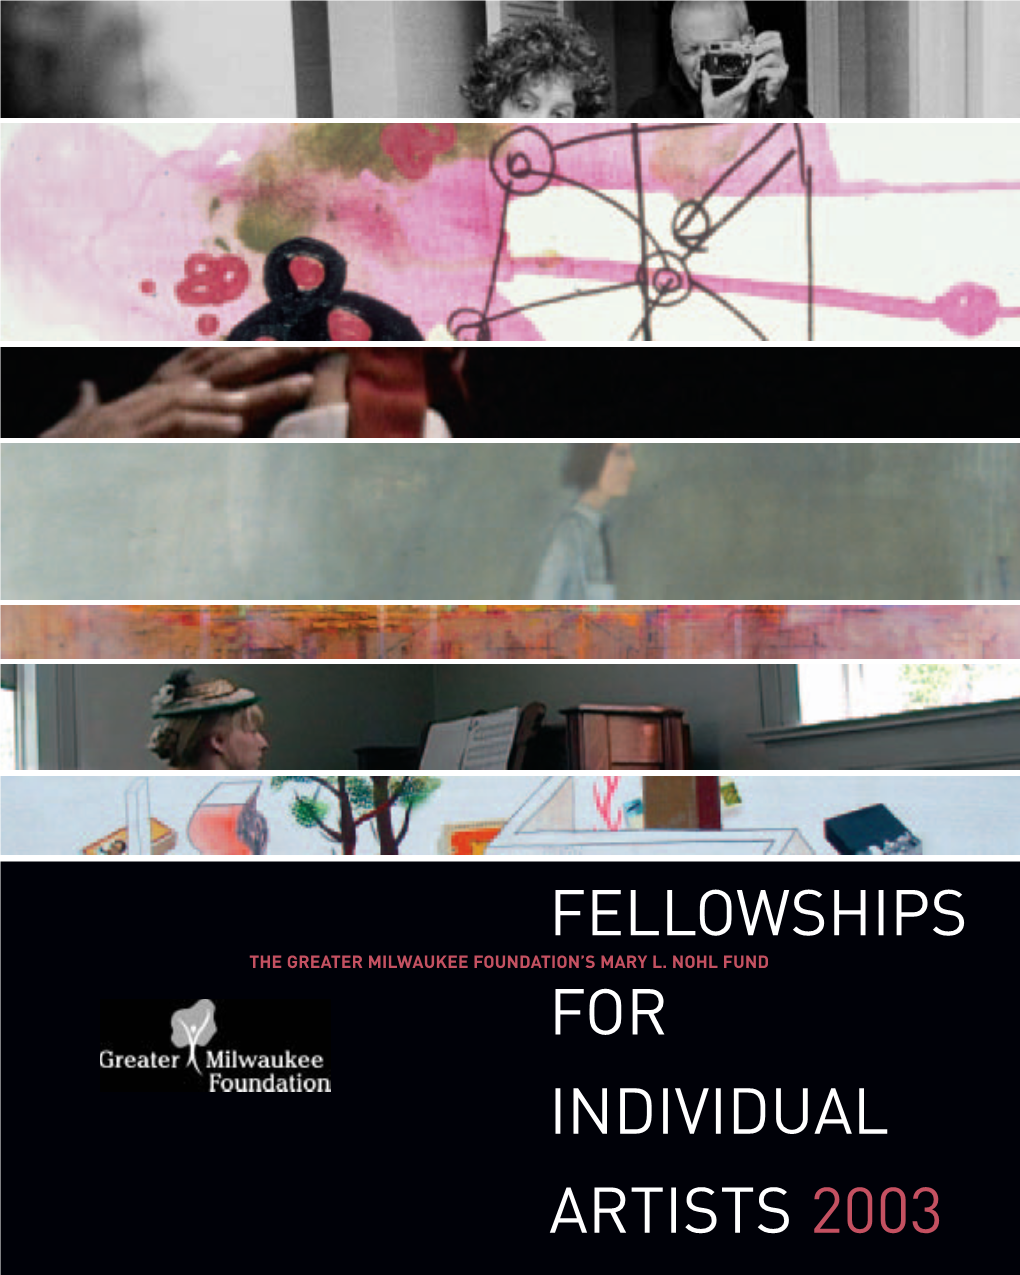 Fellowships for Individual Artists 2003